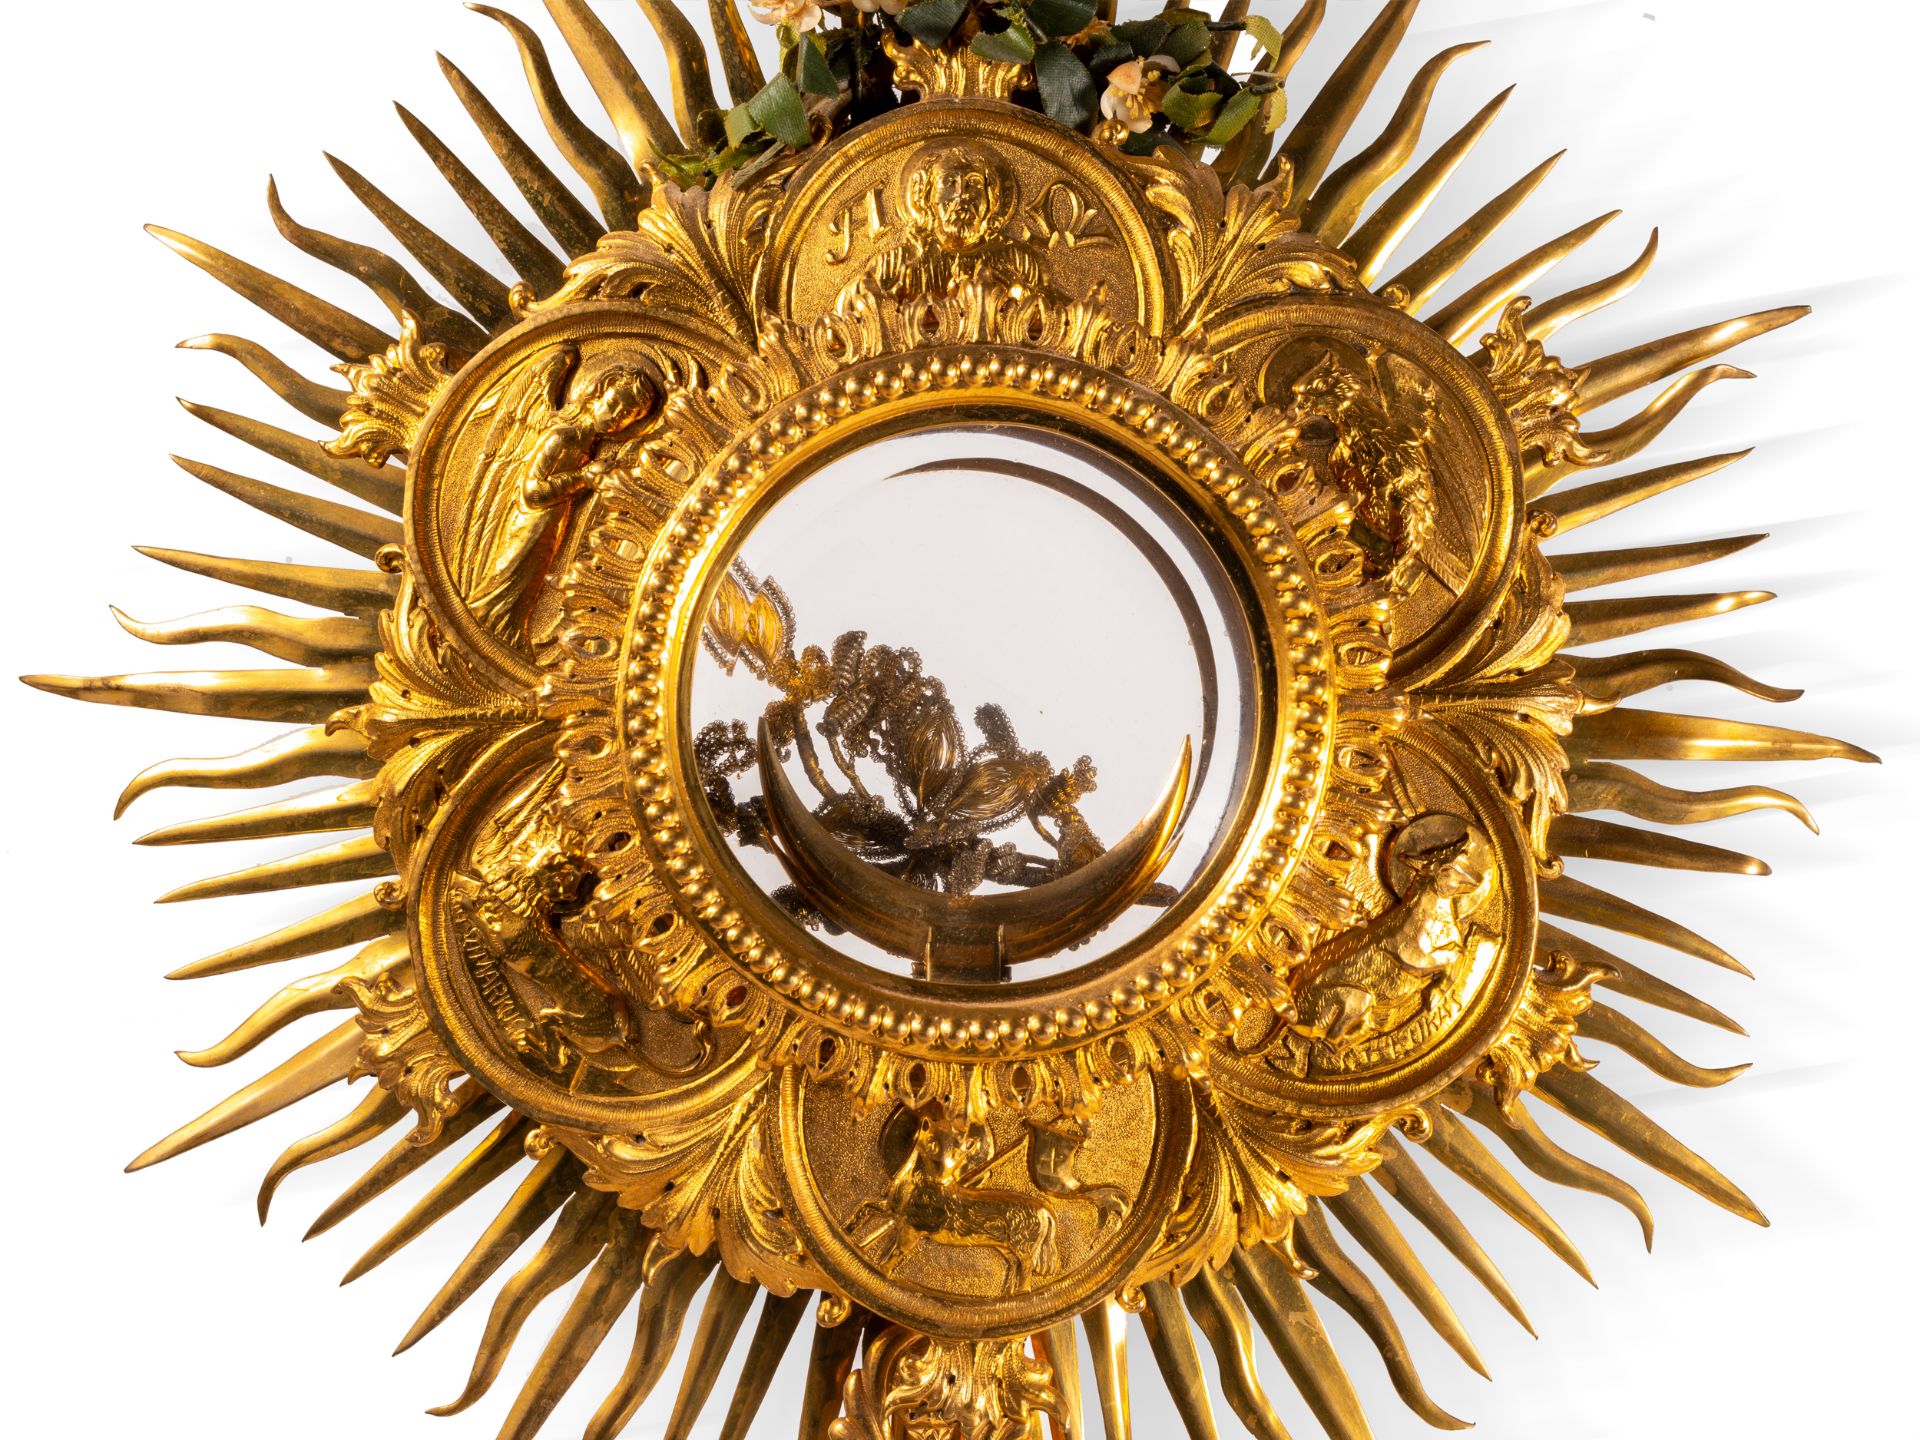 Monstrance, 19th century, Cast brass or bronze, handmolded and engraved - Image 2 of 7